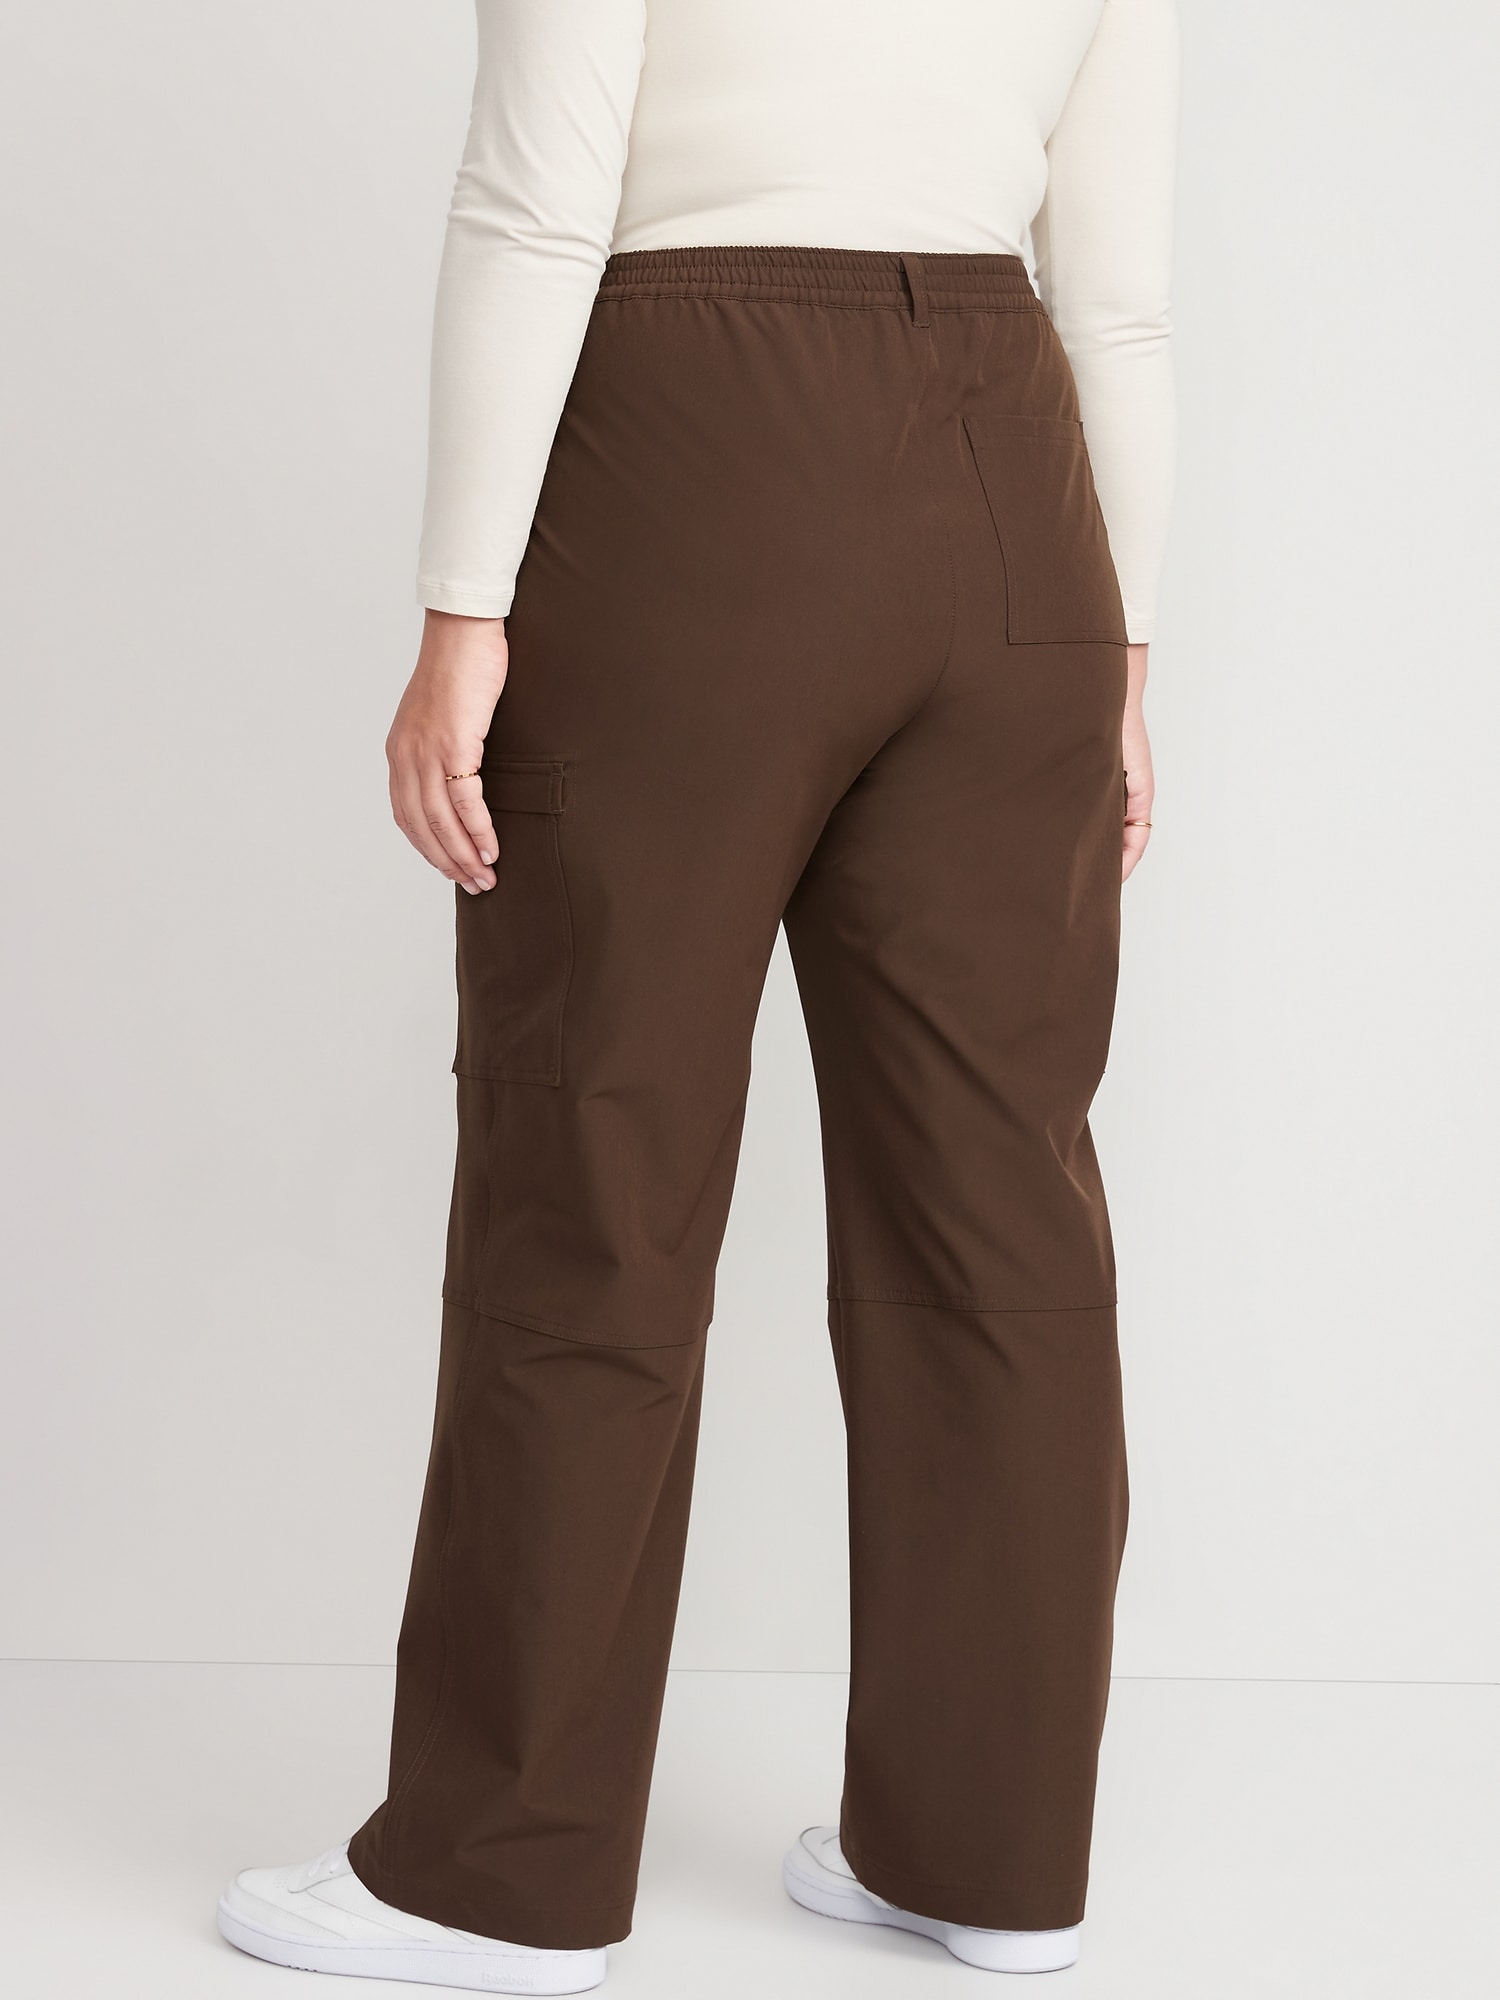 High-Waisted All-Seasons StretchTech Joggers for Women, Old Navy